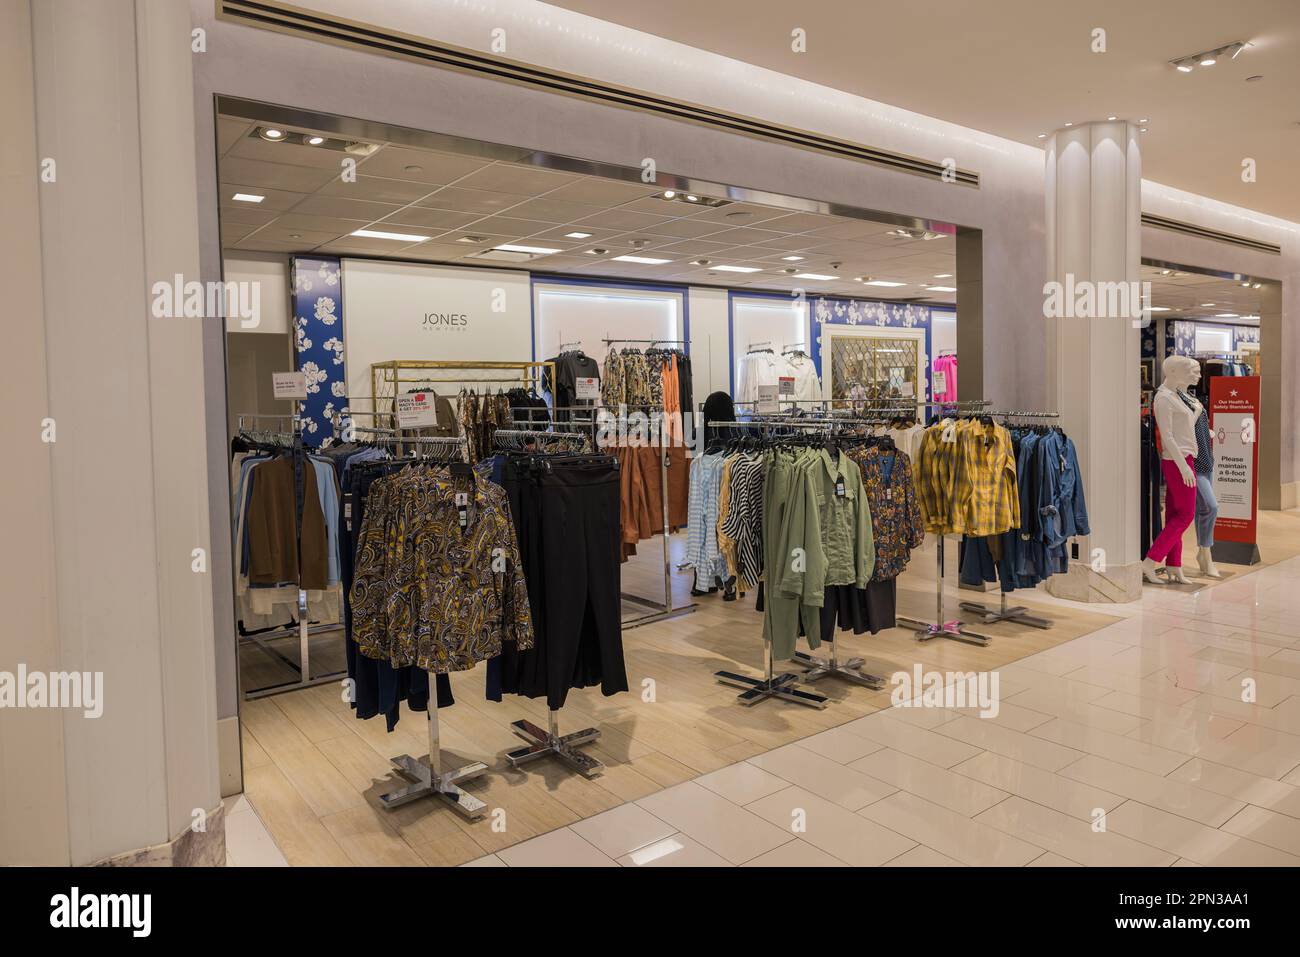 Close up view of interior of women's clothing section of Macy's department store. NY. USA. Stock Photo